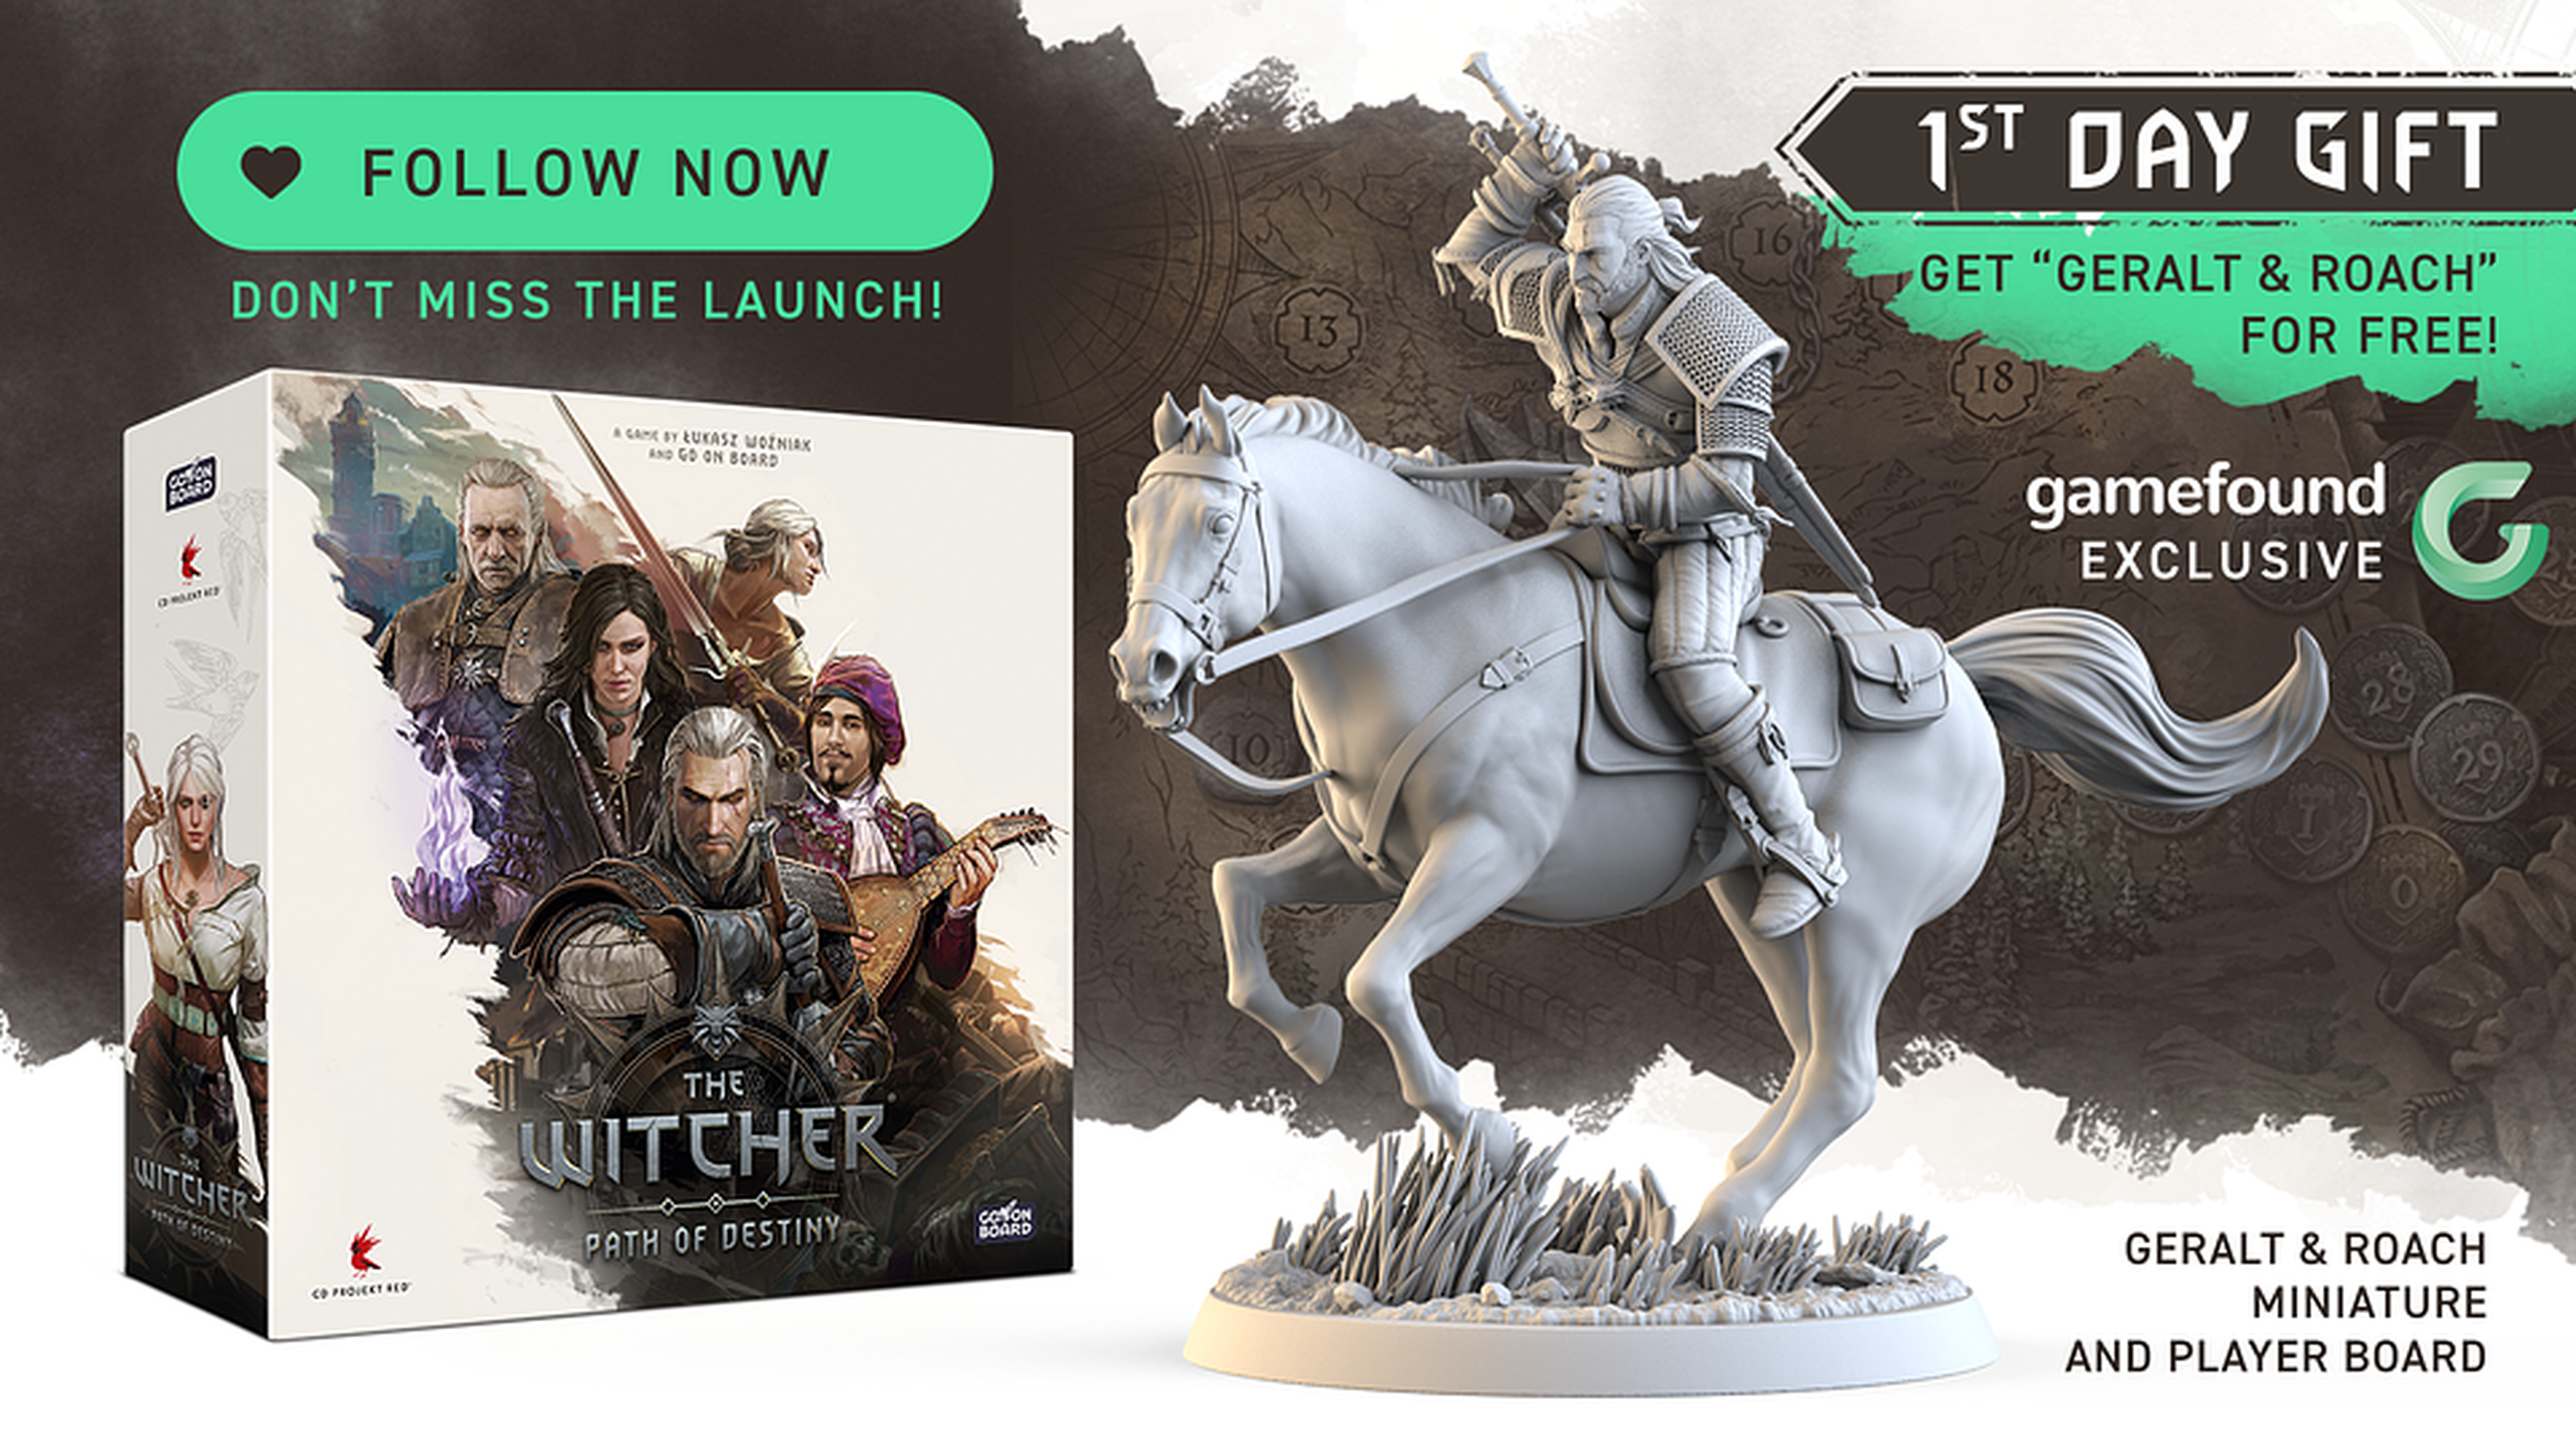 The Witcher Board Game